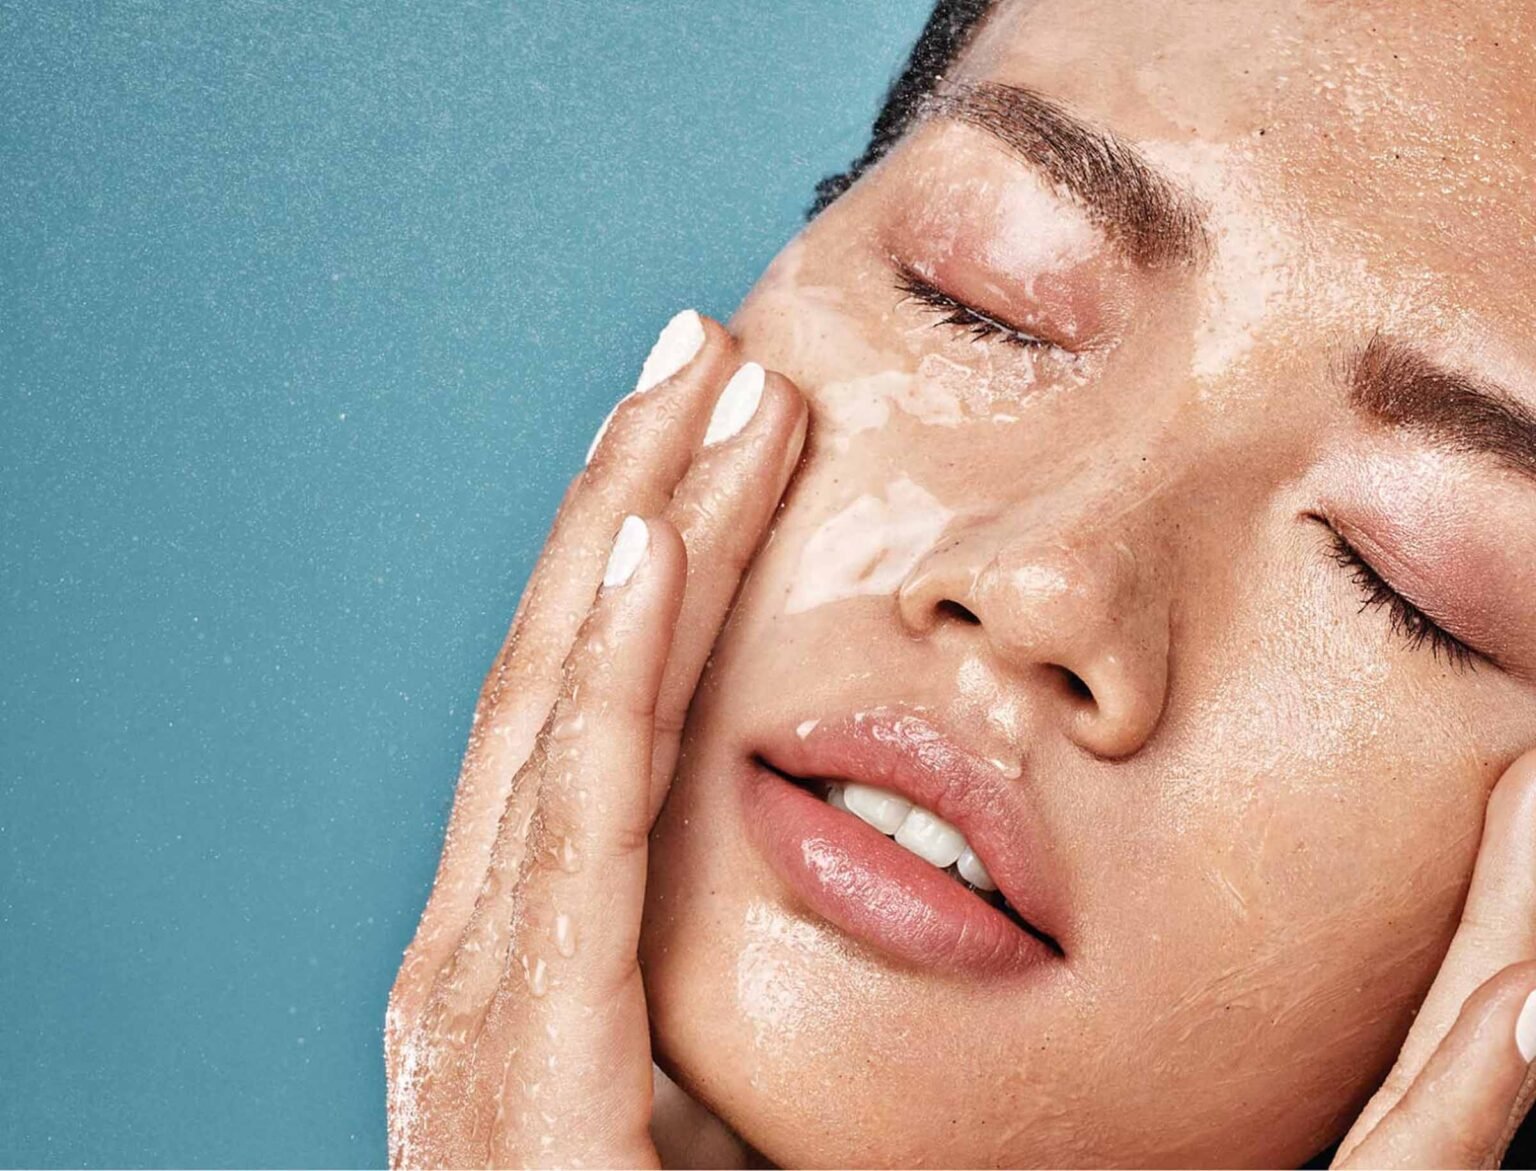 Are you looking to add to your skincare routine? Learn about some of the best cleansers on the market and how they can help your skin!